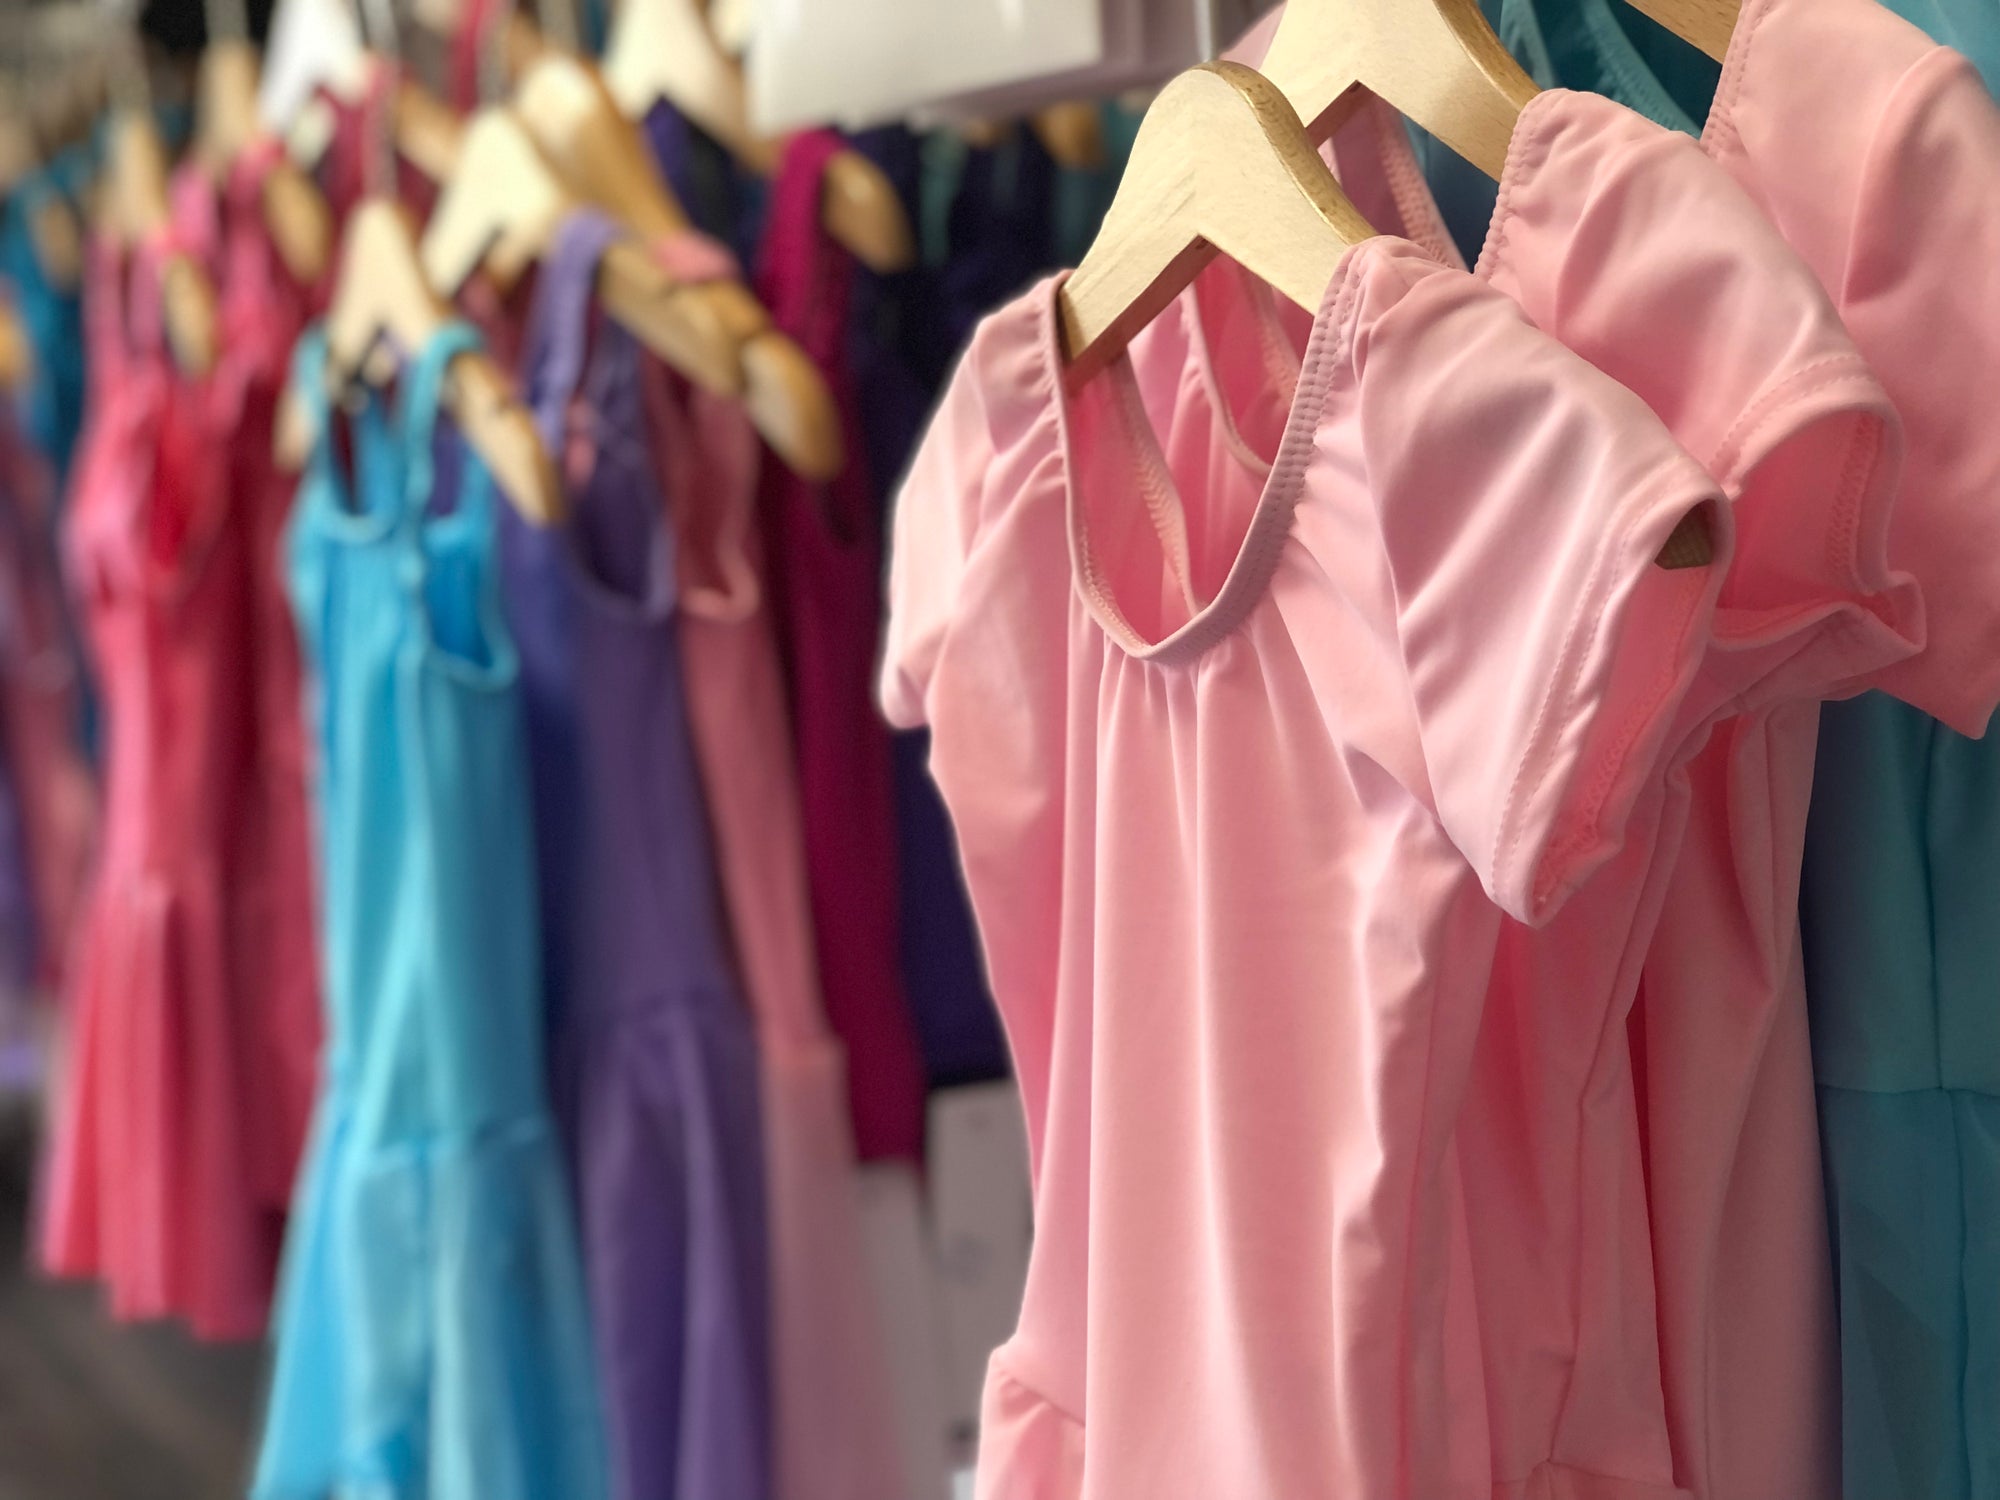 Professional Pointe Shoe Fittings, Ballet Leotards And Dance Shoes